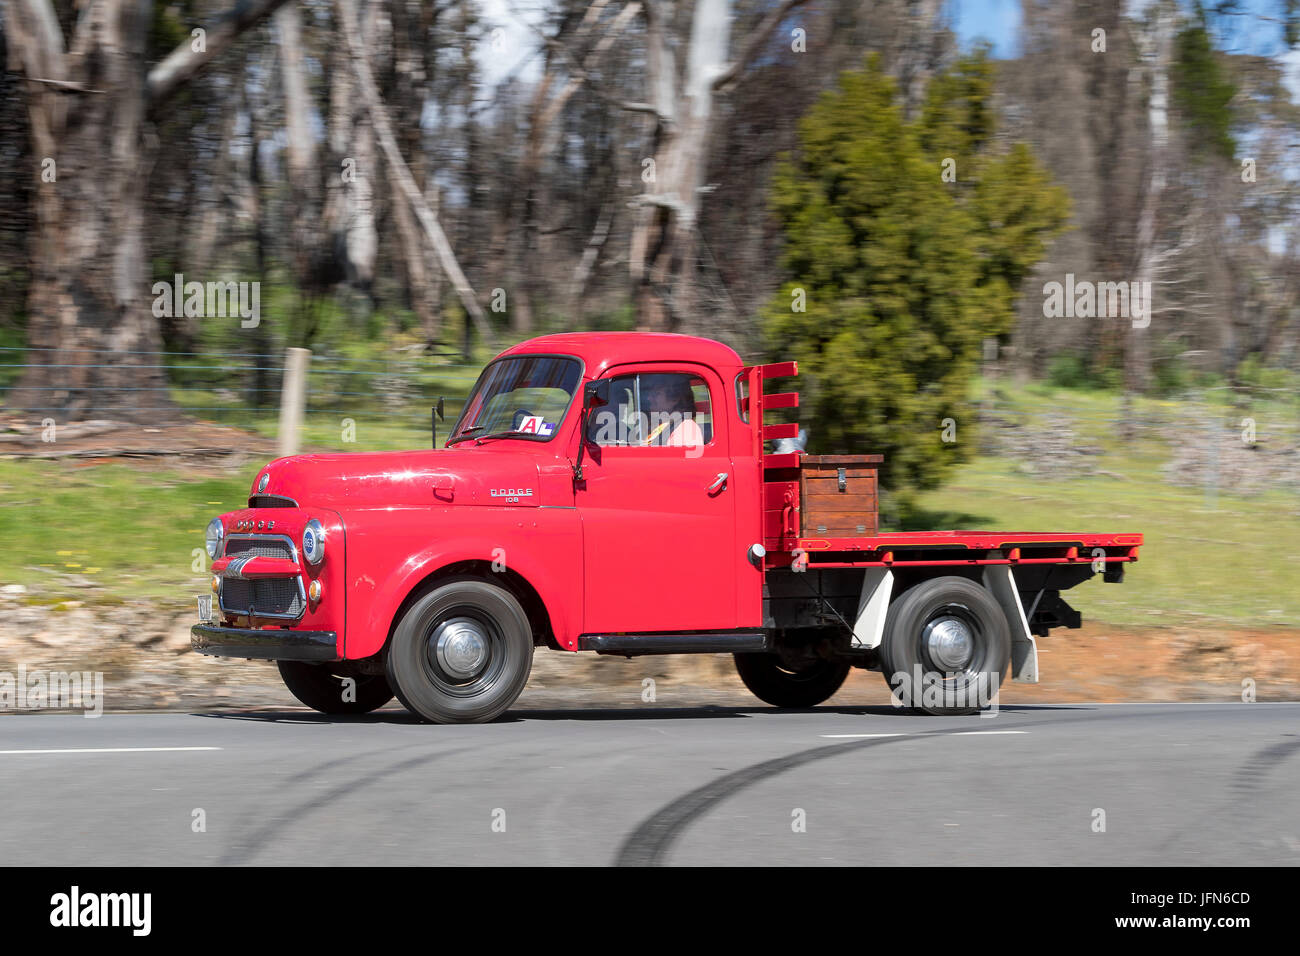 Vintage 1955 Dodge Fargo Truck driving on country roads near the town of Birdwood, South Australia. Stock Photo